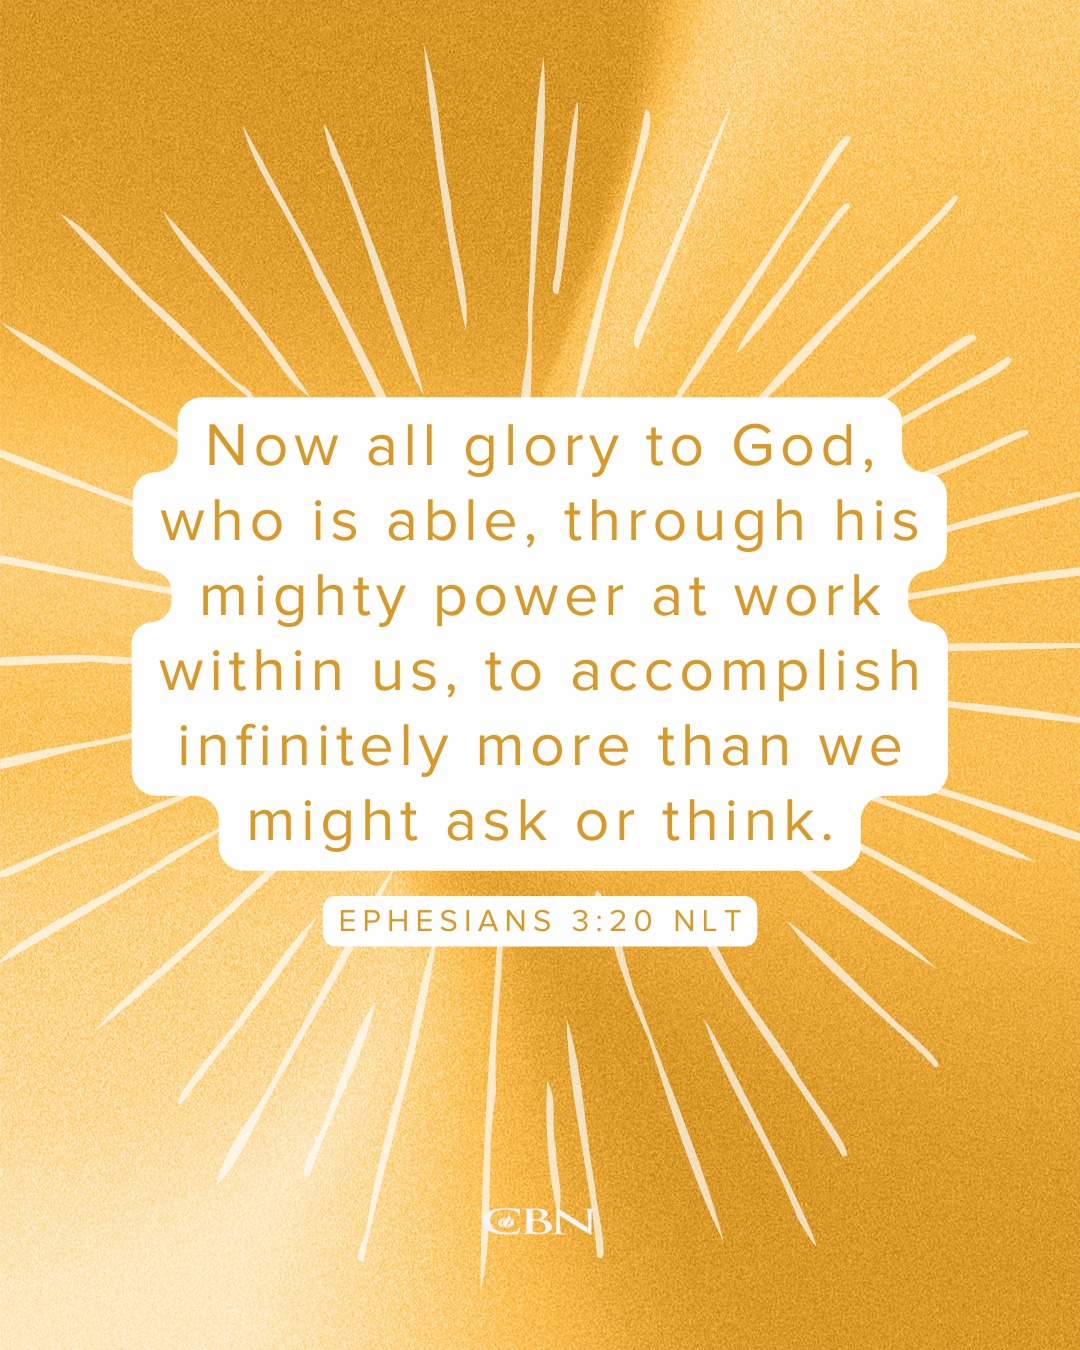 'Now all glory to God, who is able, through his mighty power at work within us, to us, accomplish infinitely more than we might ask or think. EPHESIANS 3:20 NLT CBN'